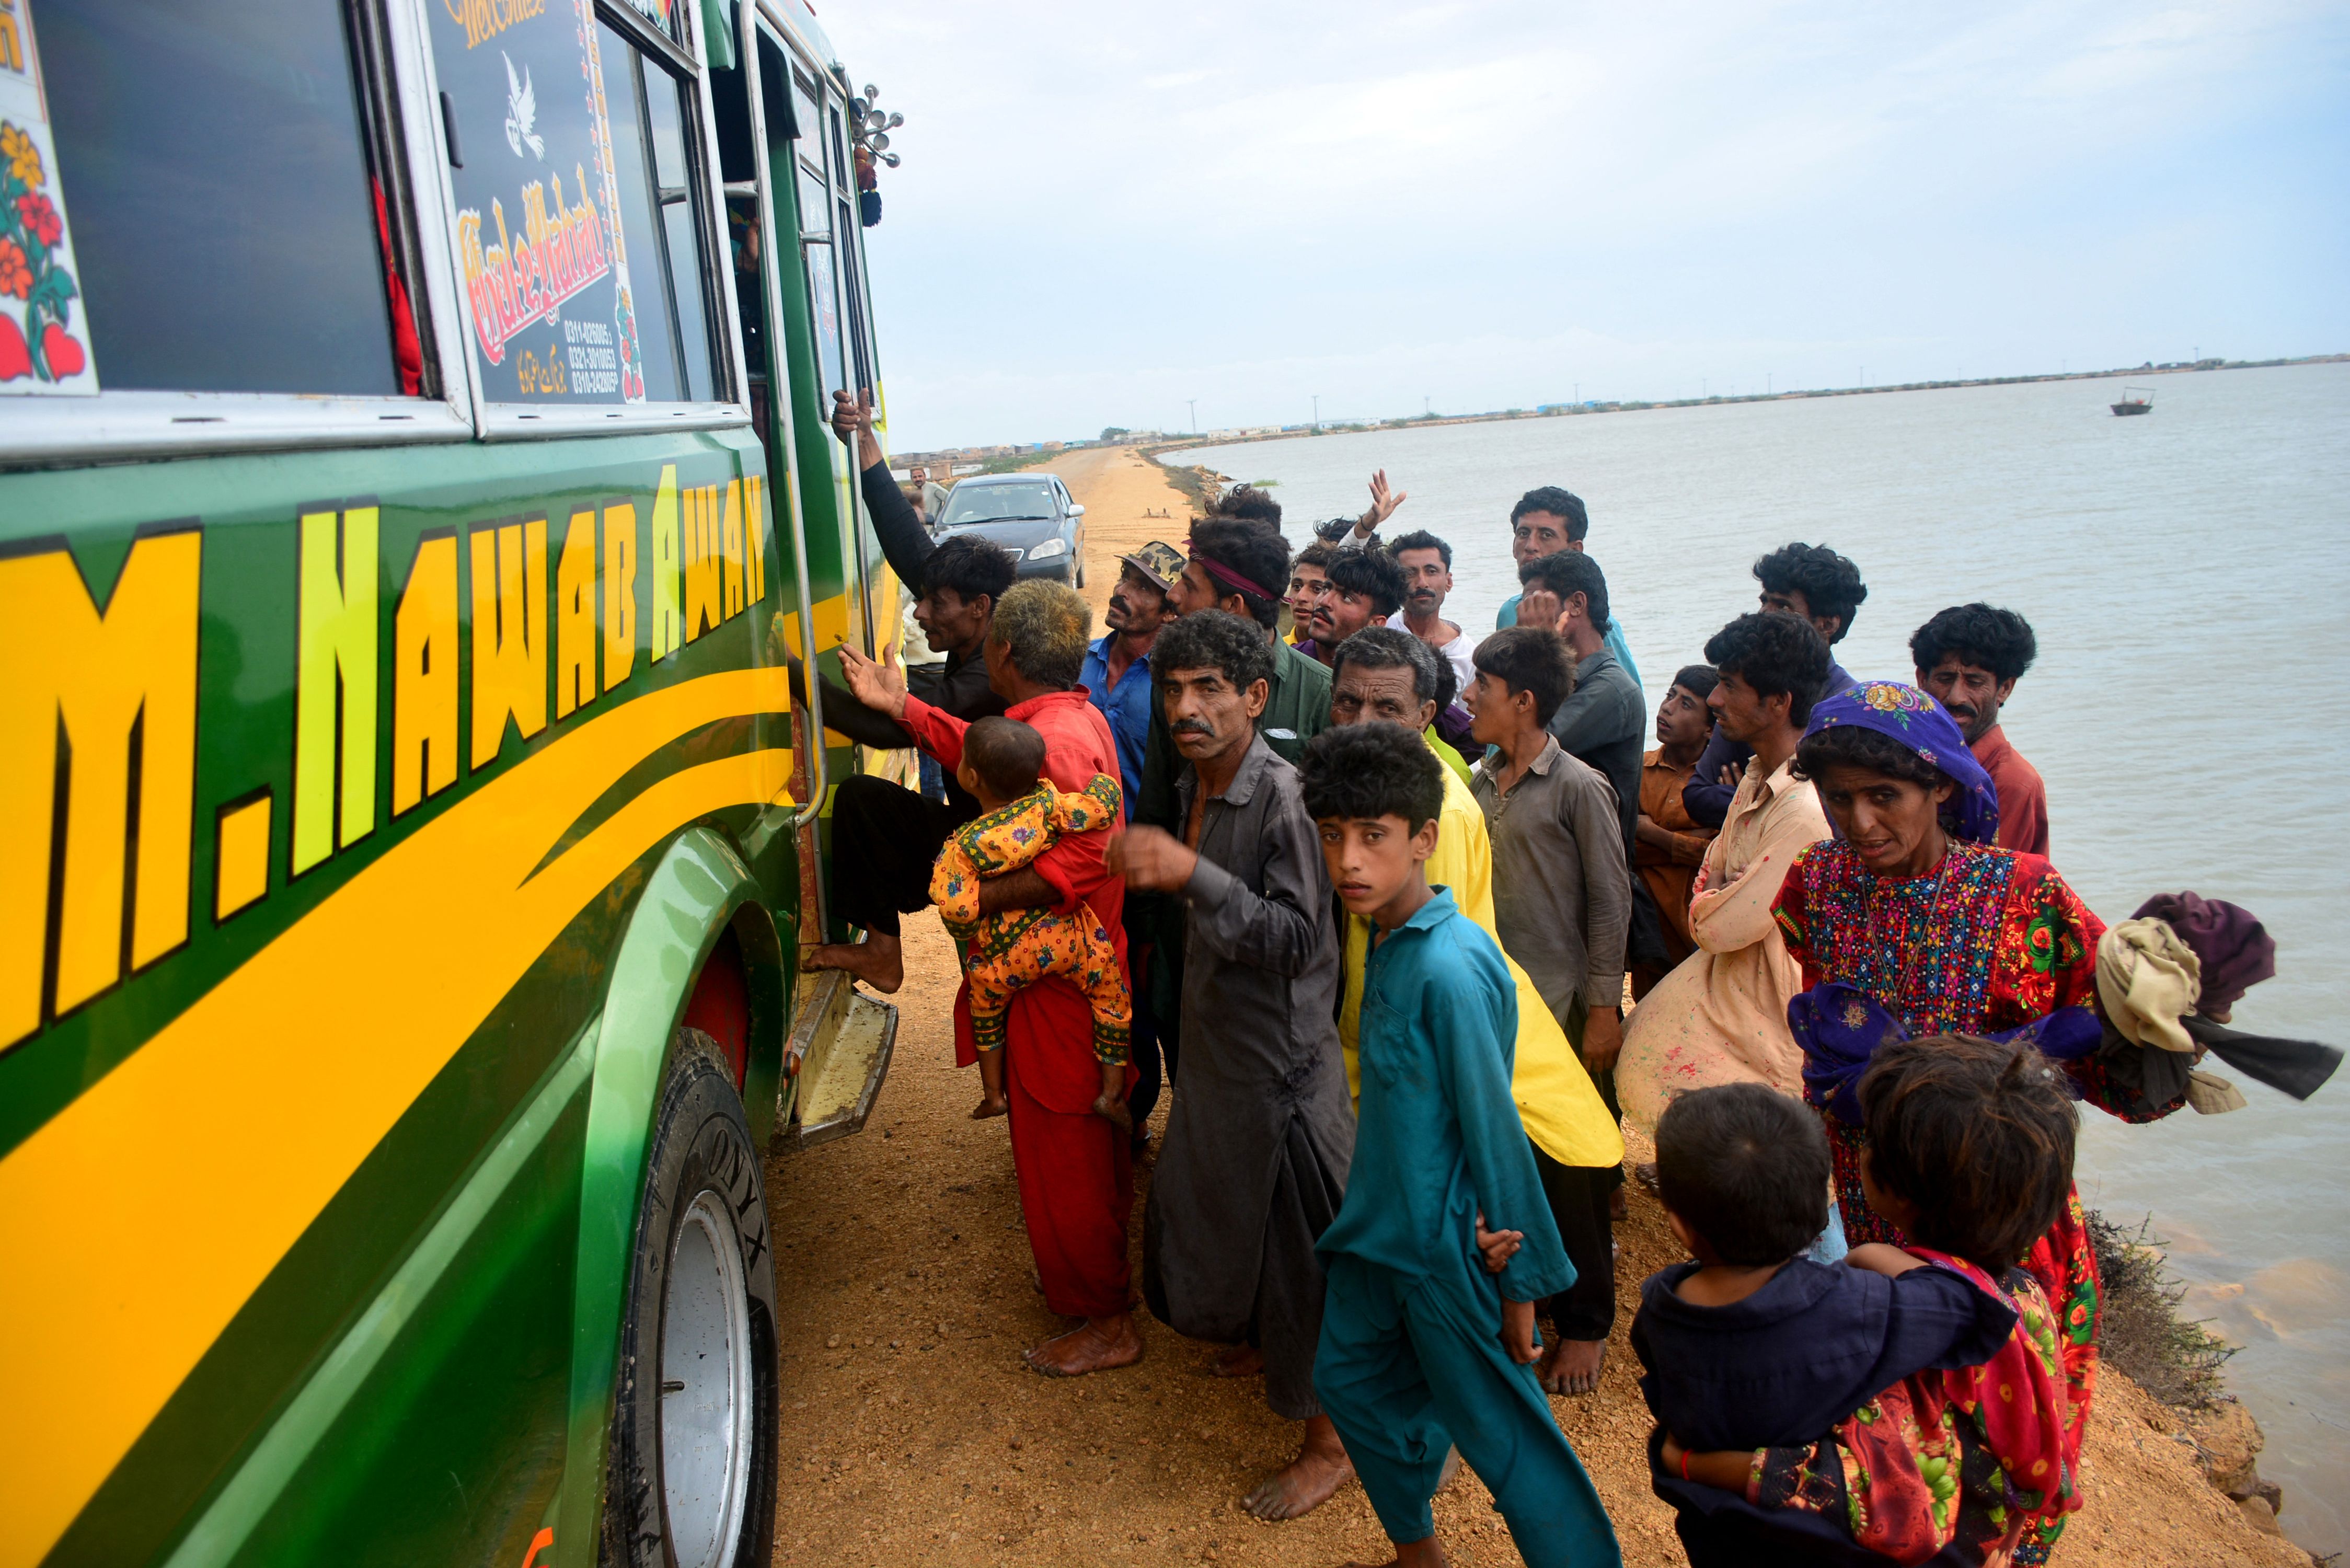 Residents evacuate from a coastal area of Keti Bandar before the due onset of cyclone Biparjoy, in Thatta district of Pakistan’s Sindh